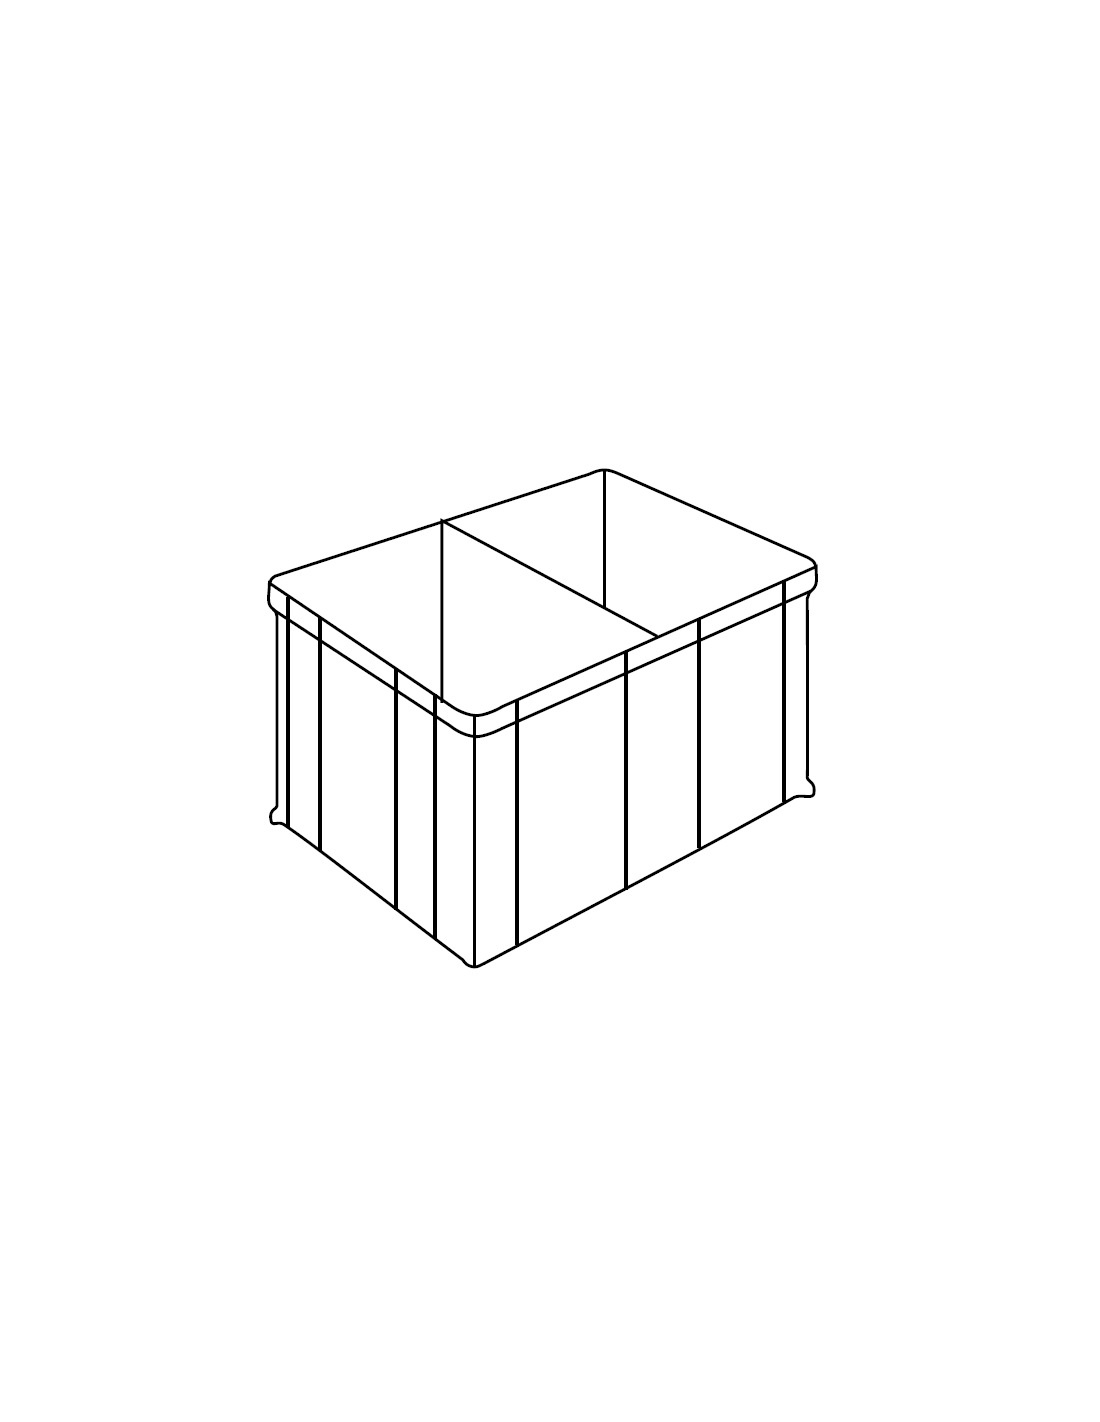 Kit complete drawers 12+1 in ABS - 12 x cm 51.5x 31 x 17.5 + 1 x cm 62 x 30 x 18.5